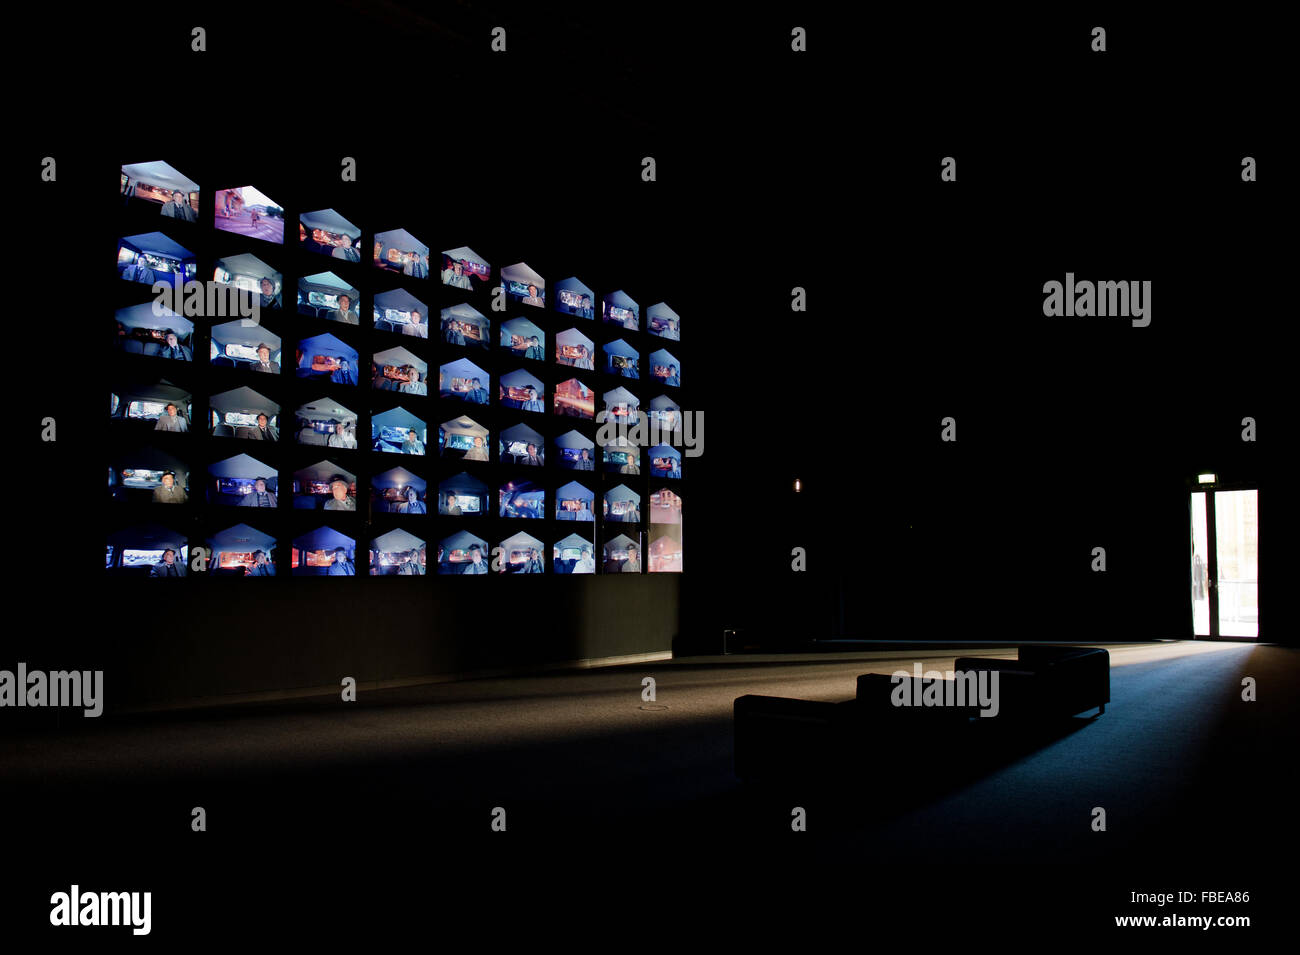 The multimedia installation 'Die Provinz des Menschen / The Human Province' by the composer and director Heiner Goebbels can be seen in the Kunsthalle im Lipsiusbau in Dresden, Germany, 14 January 2016. The installation is made up of 54 different film sequences, played on a giant wall of monitors, together forming a composition that explores polyphony both as a musical and visual phenomenon and that presents an urban soundscape of various cities, criss-crossed by actor André Wilms. Visitors watch the same man observing the same rituals over the course of ten years, between 2004 and 2014, pacin Stock Photo